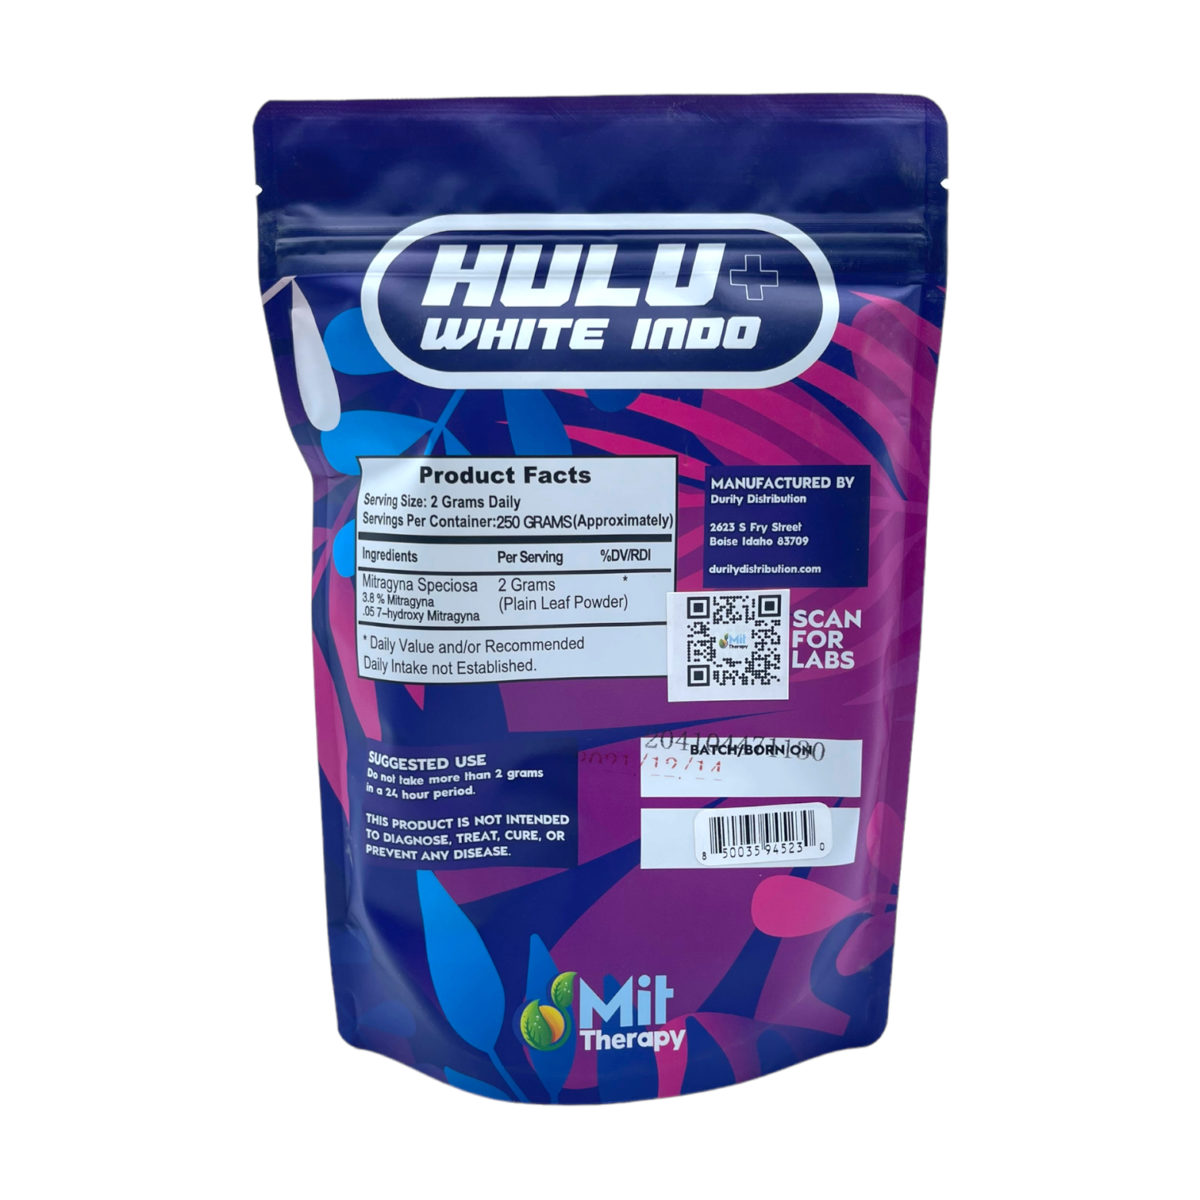 MIT Therapy Hulu White Indo Extract Enhanced Kratom Capsules